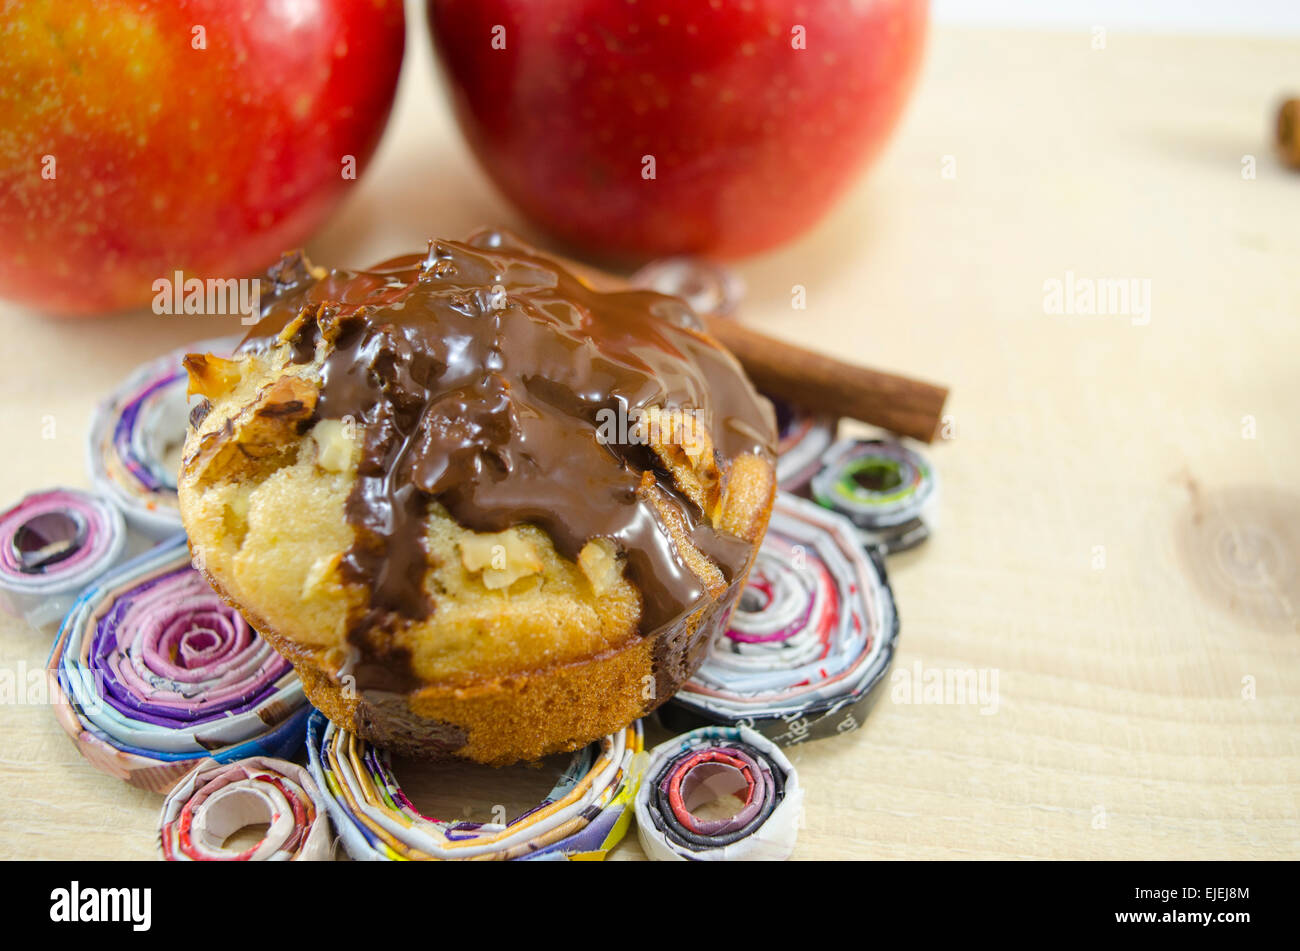 Delicious chocolate muffin standing on a hand made paper plate with two apples in the background Stock Photo